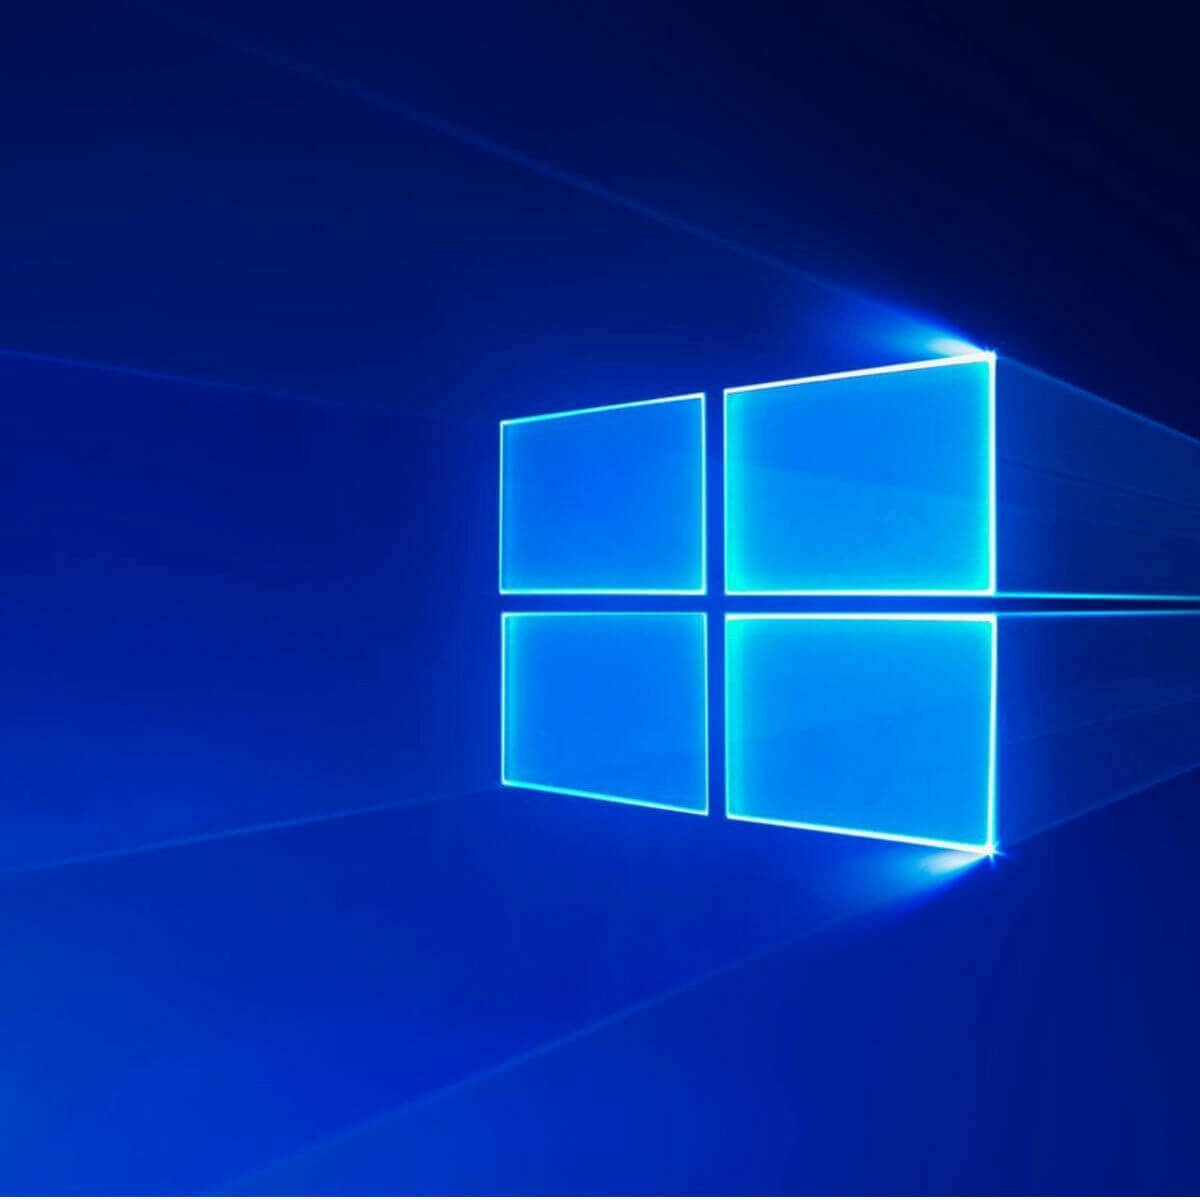 Fix Windows 10 Changes Resolution On Its Own